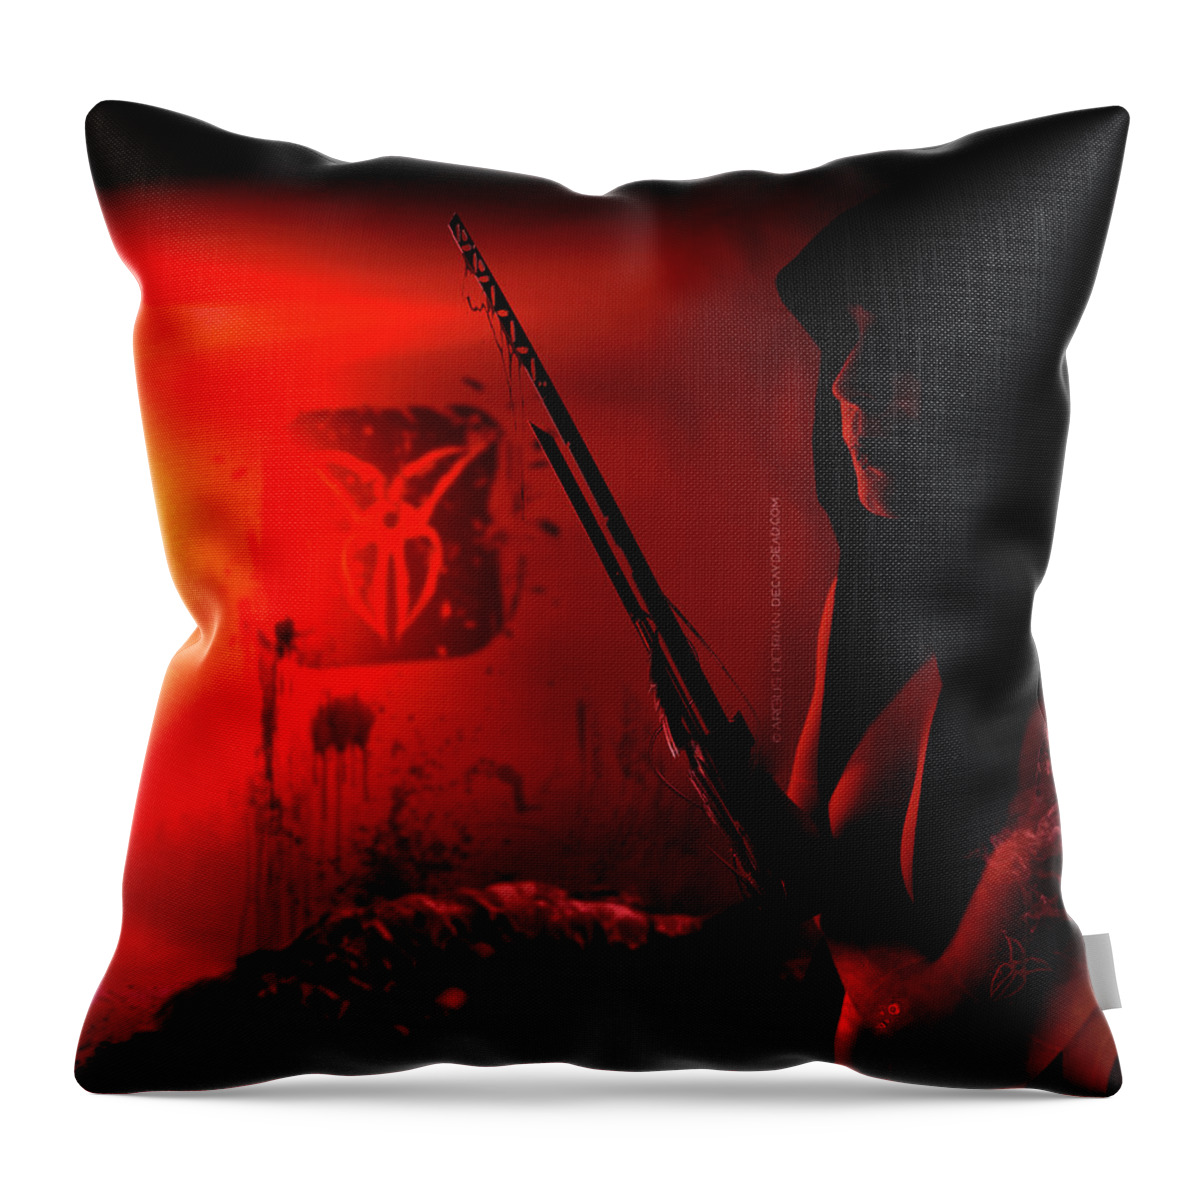 Argus Dorian Throw Pillow featuring the digital art THE RED DRAGON Slaughter in Darkness by Argus Dorian